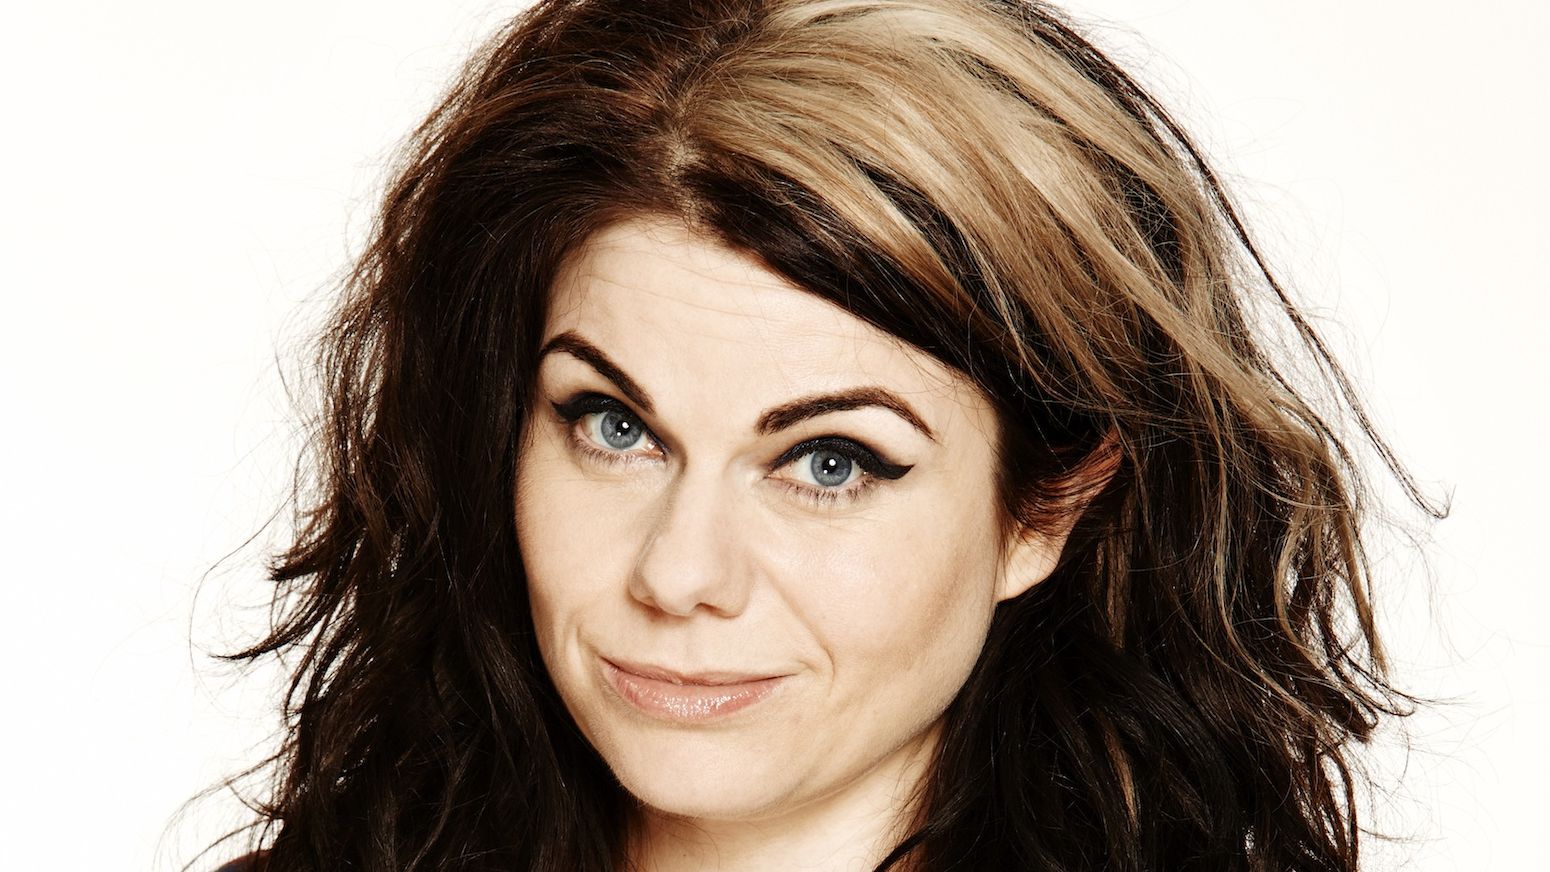 Writer and journalist Caitlin Moran who will be appearing at this year's WOW Festival. 